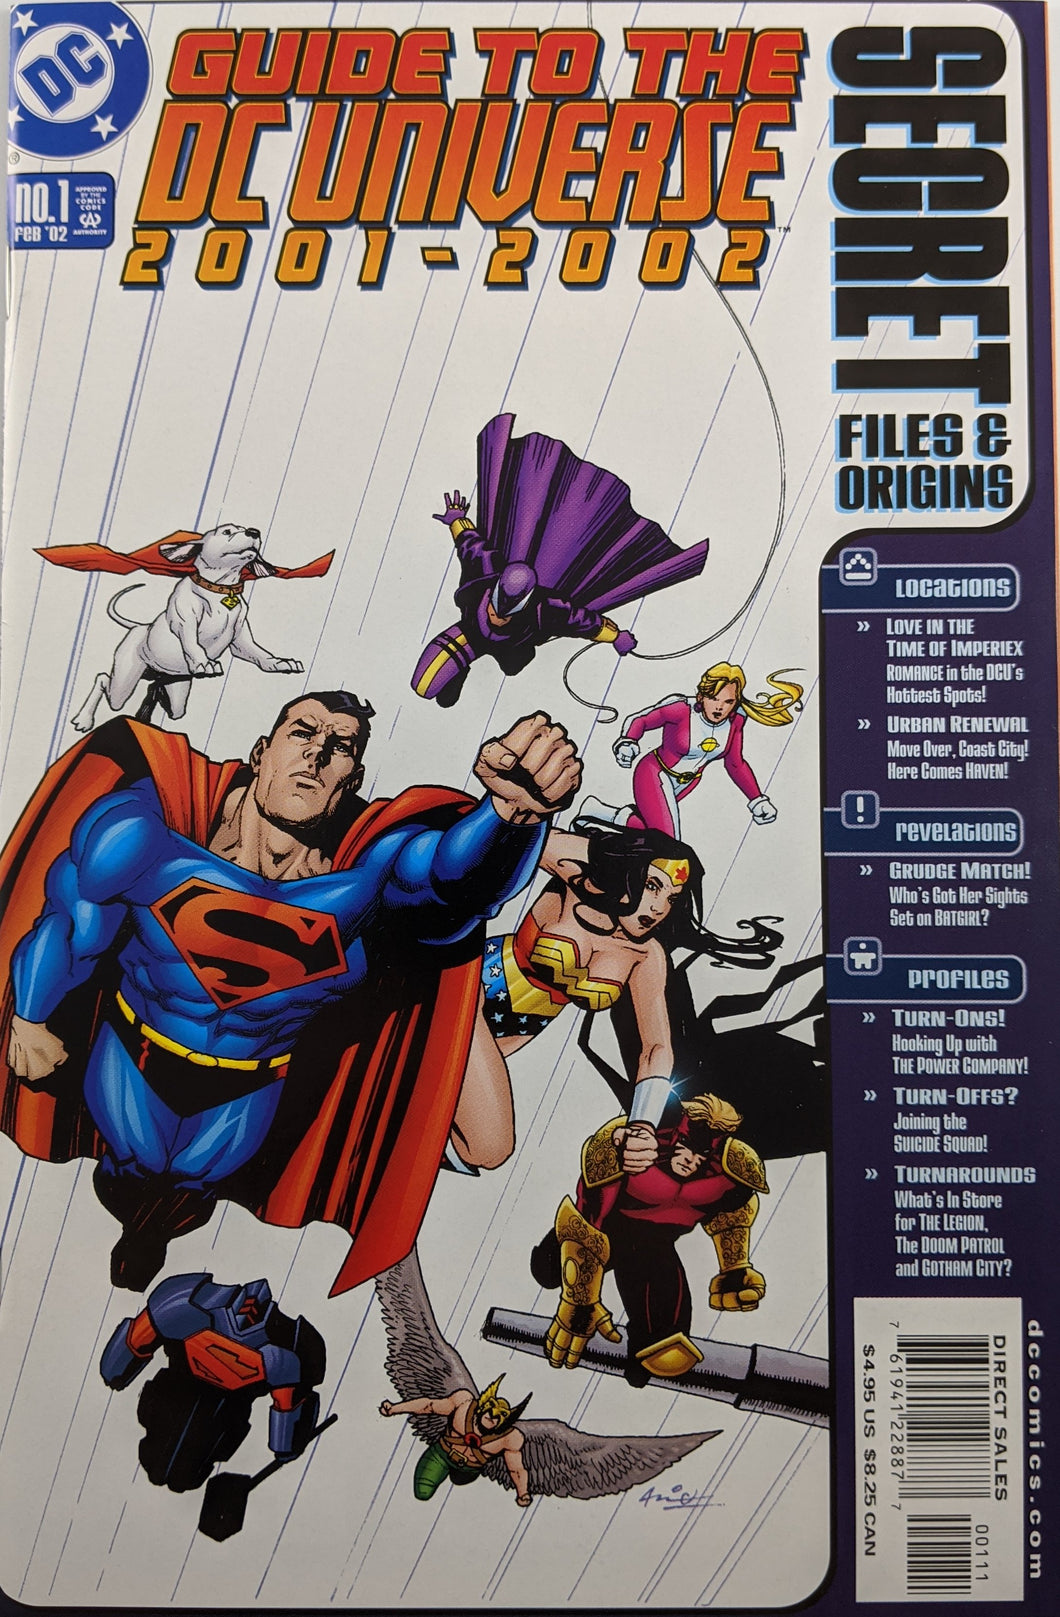 Guide To The DC Universe Secret Files And Origins 2001-2002 (2002) #1